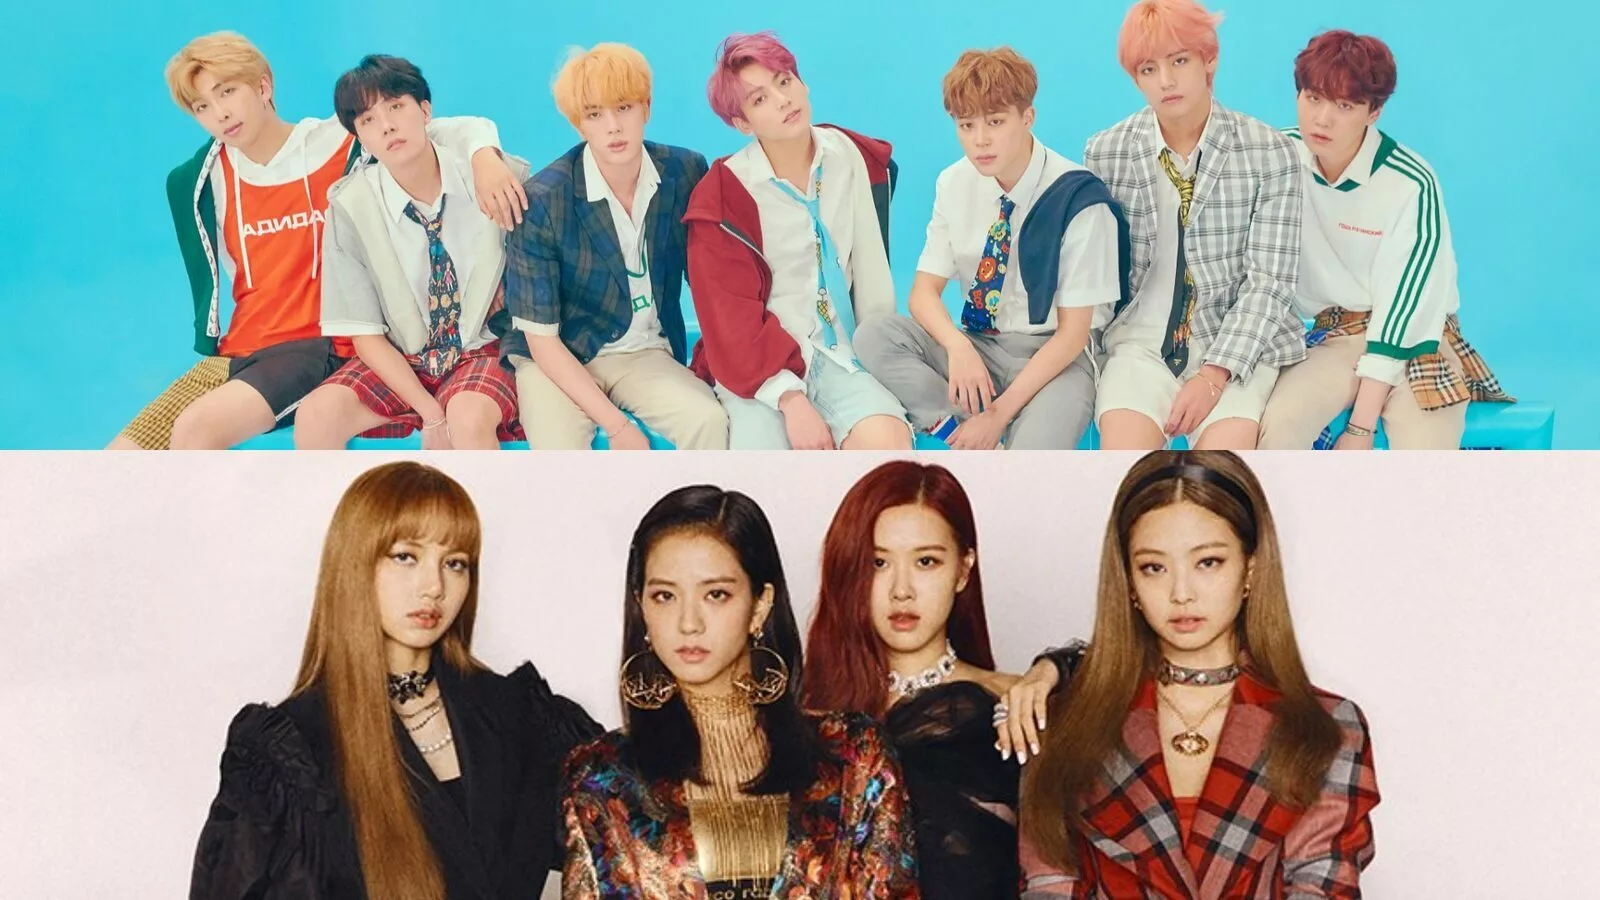 Bts Blackpink Twice And Exo Dominate Youtube S Most Viewed K Pop Groups List